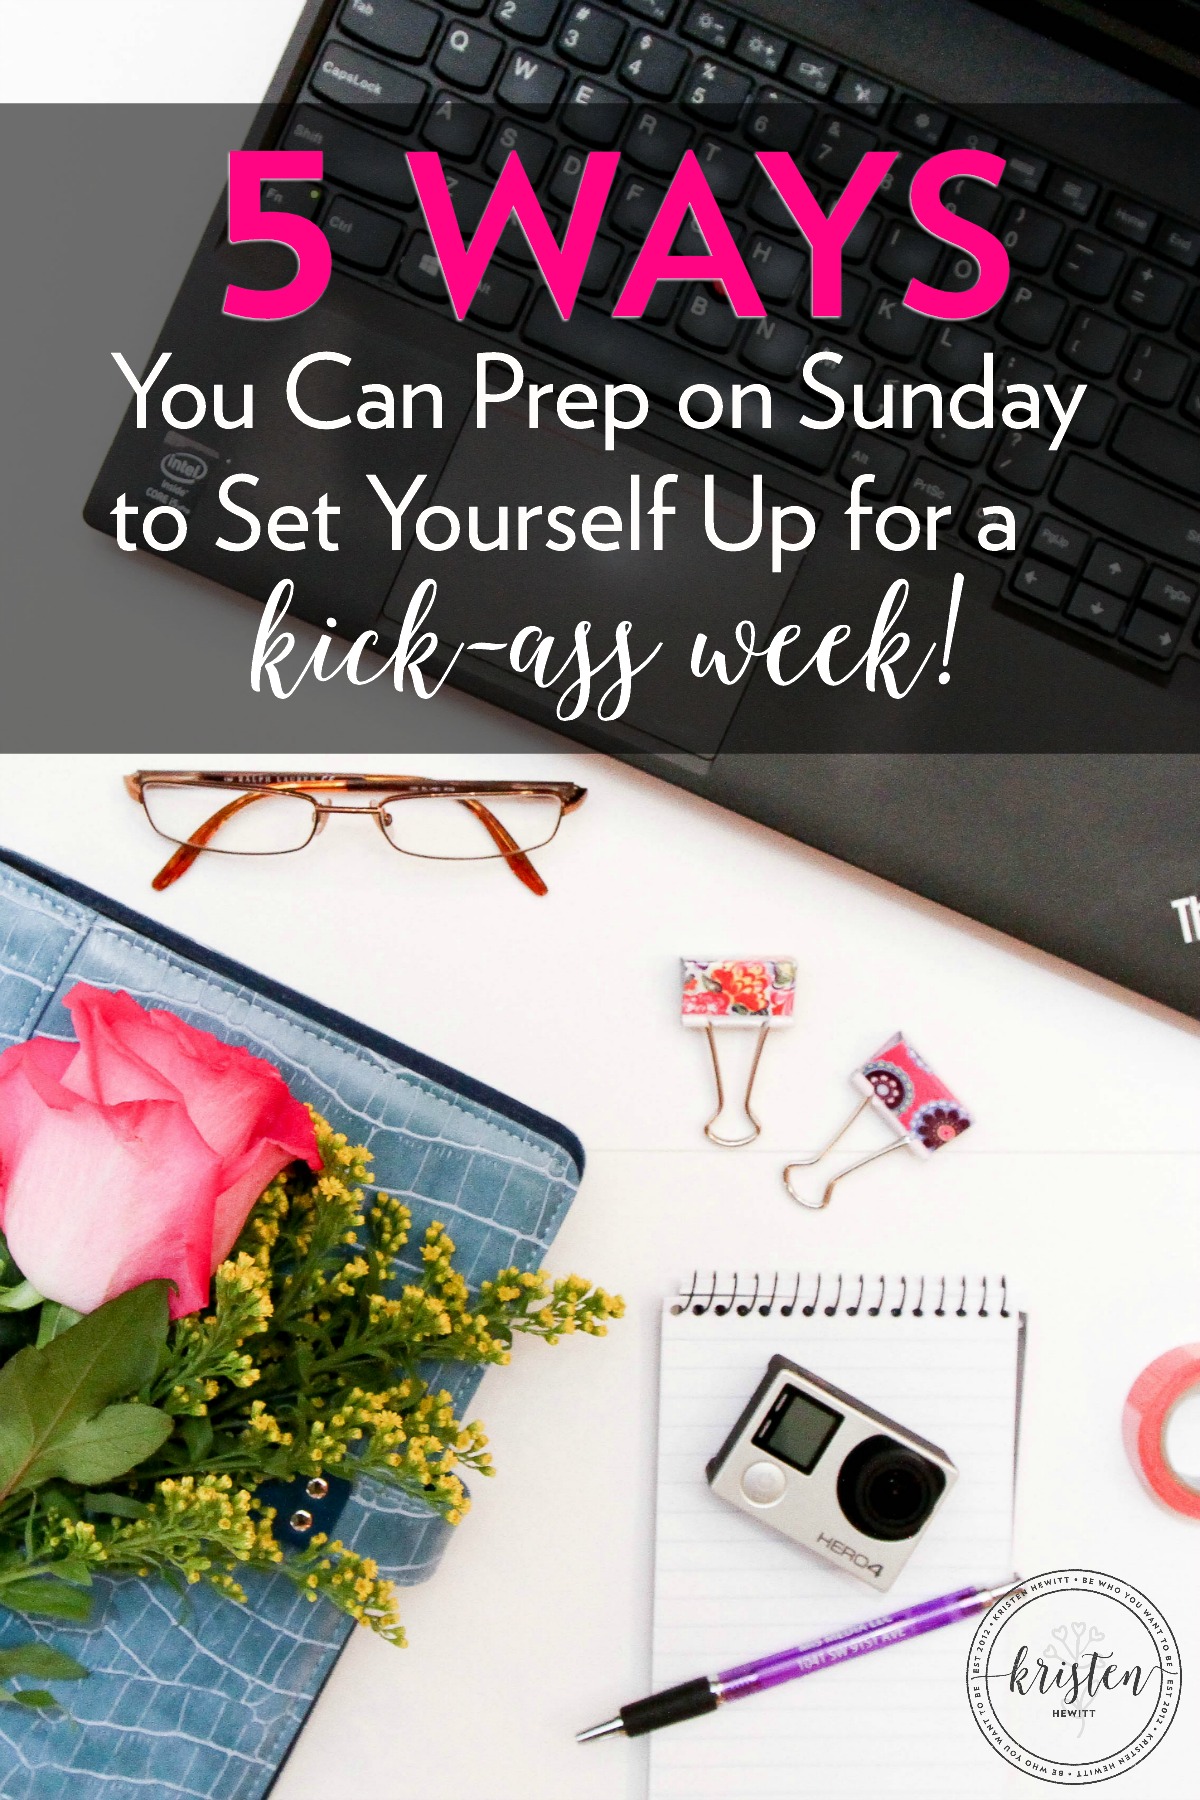 Do you find yourself lost and sometimes overwhelmed during the week trying to manage work, life, kids, and all the responsibilities at home? I did too until I started doing these things every Sunday. Try it and see if it helps you too!